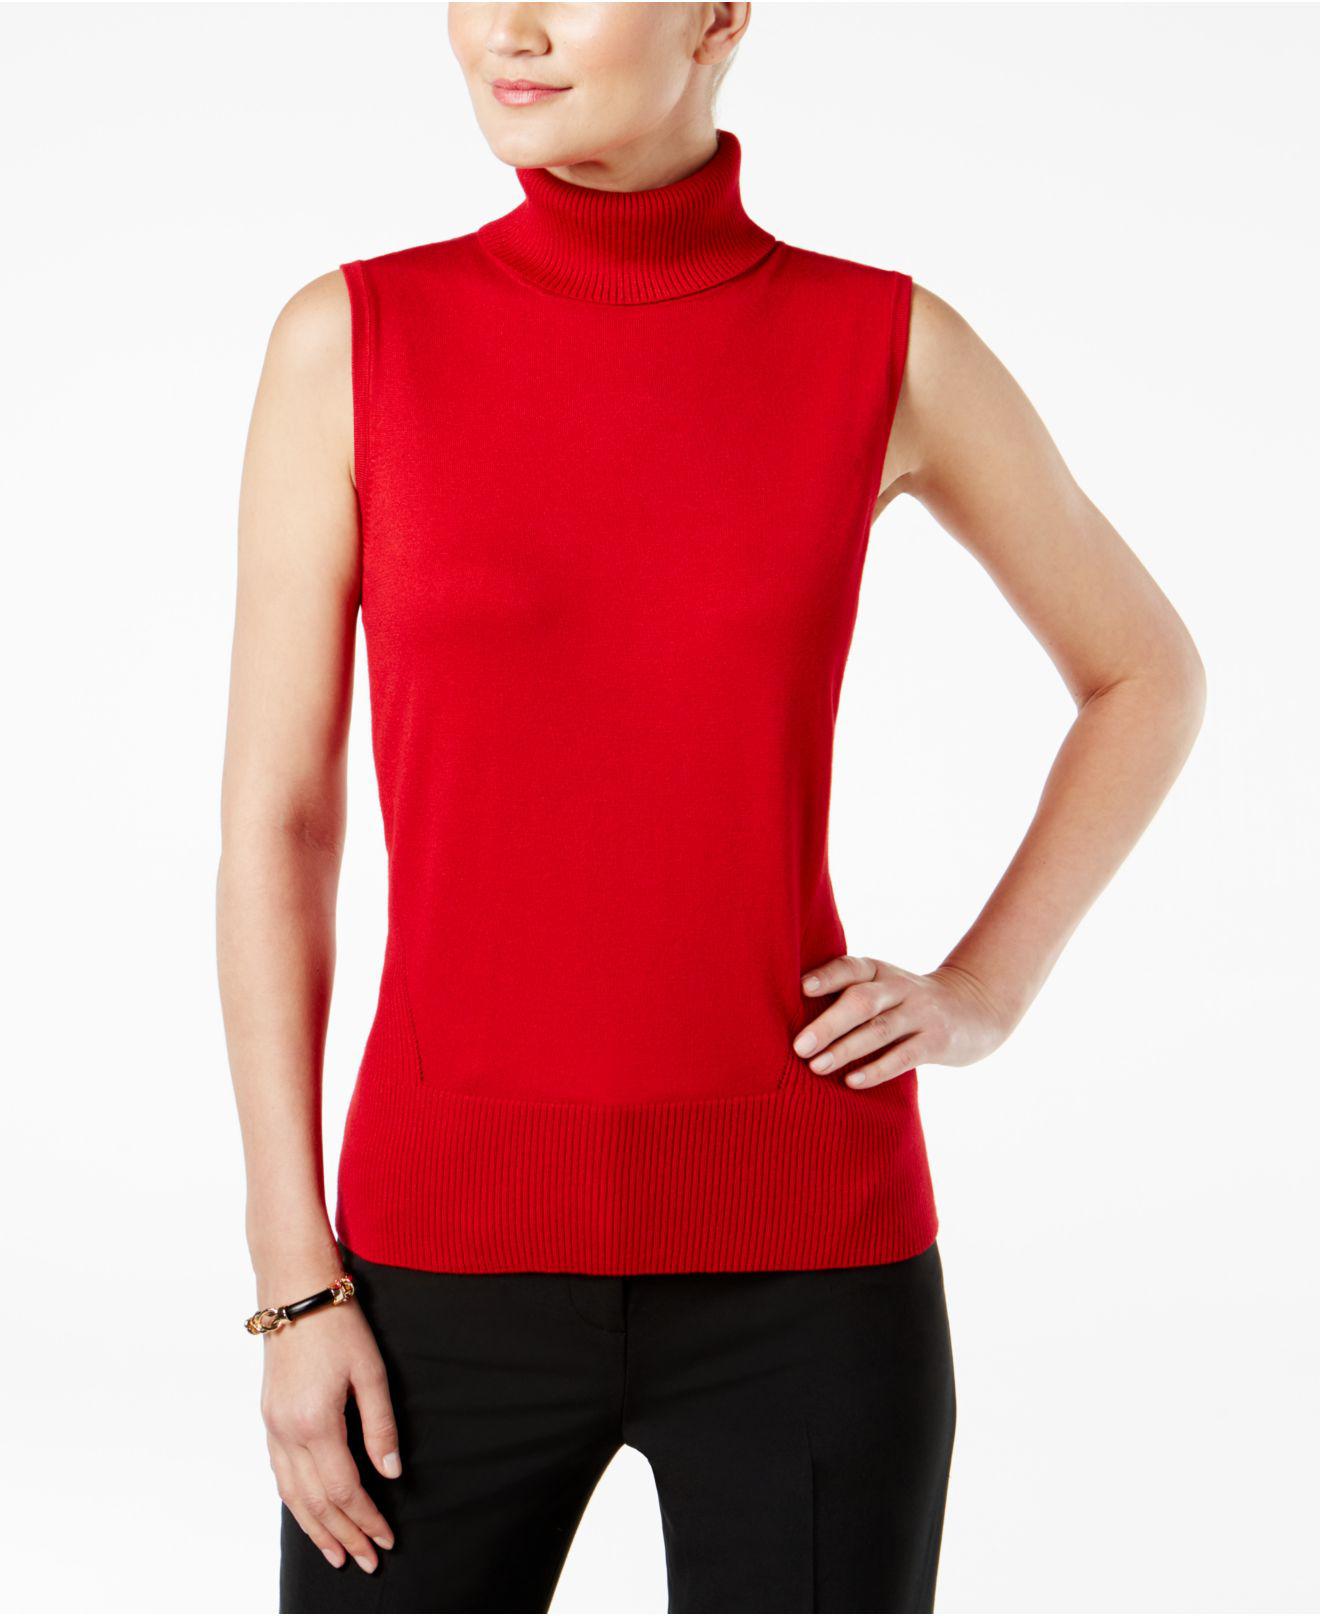 Cable & Gauge Sleeveless Turtleneck Sweater in Red